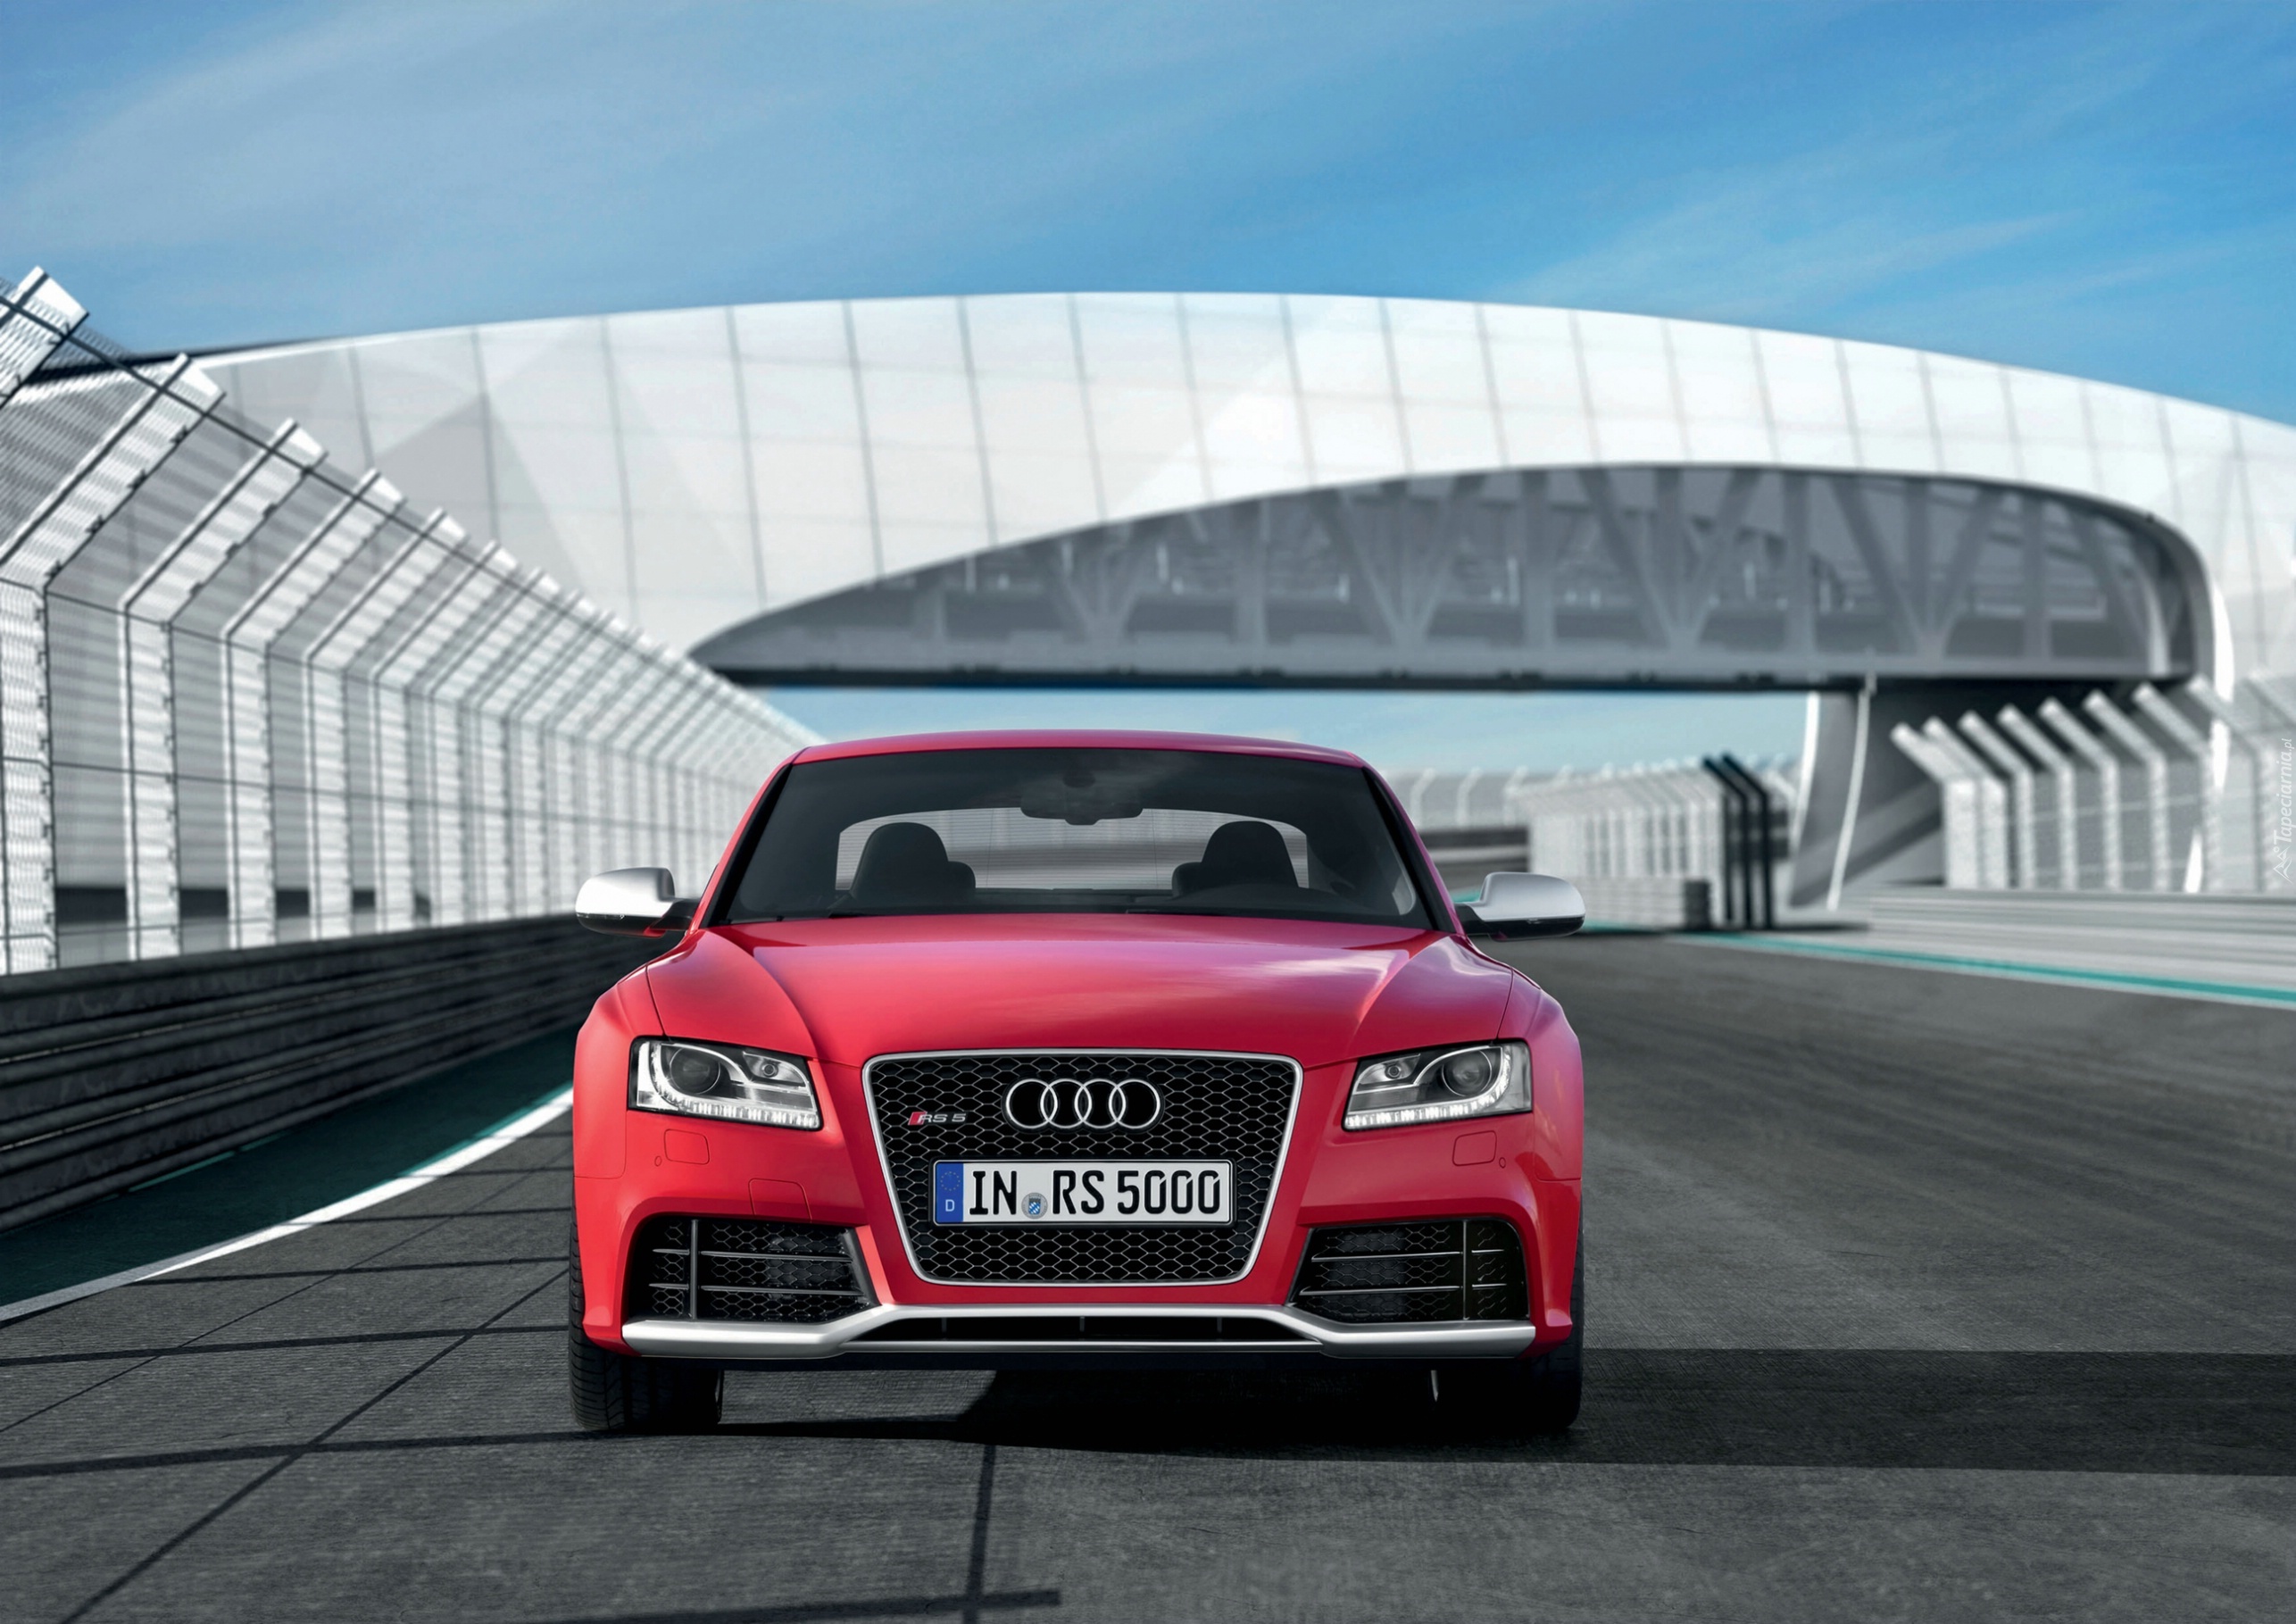 Ауди г 5. Audi rs5 2010. Audi rs5 2002. Audi rs5 Coupe 2011. Audi rs5 Front.